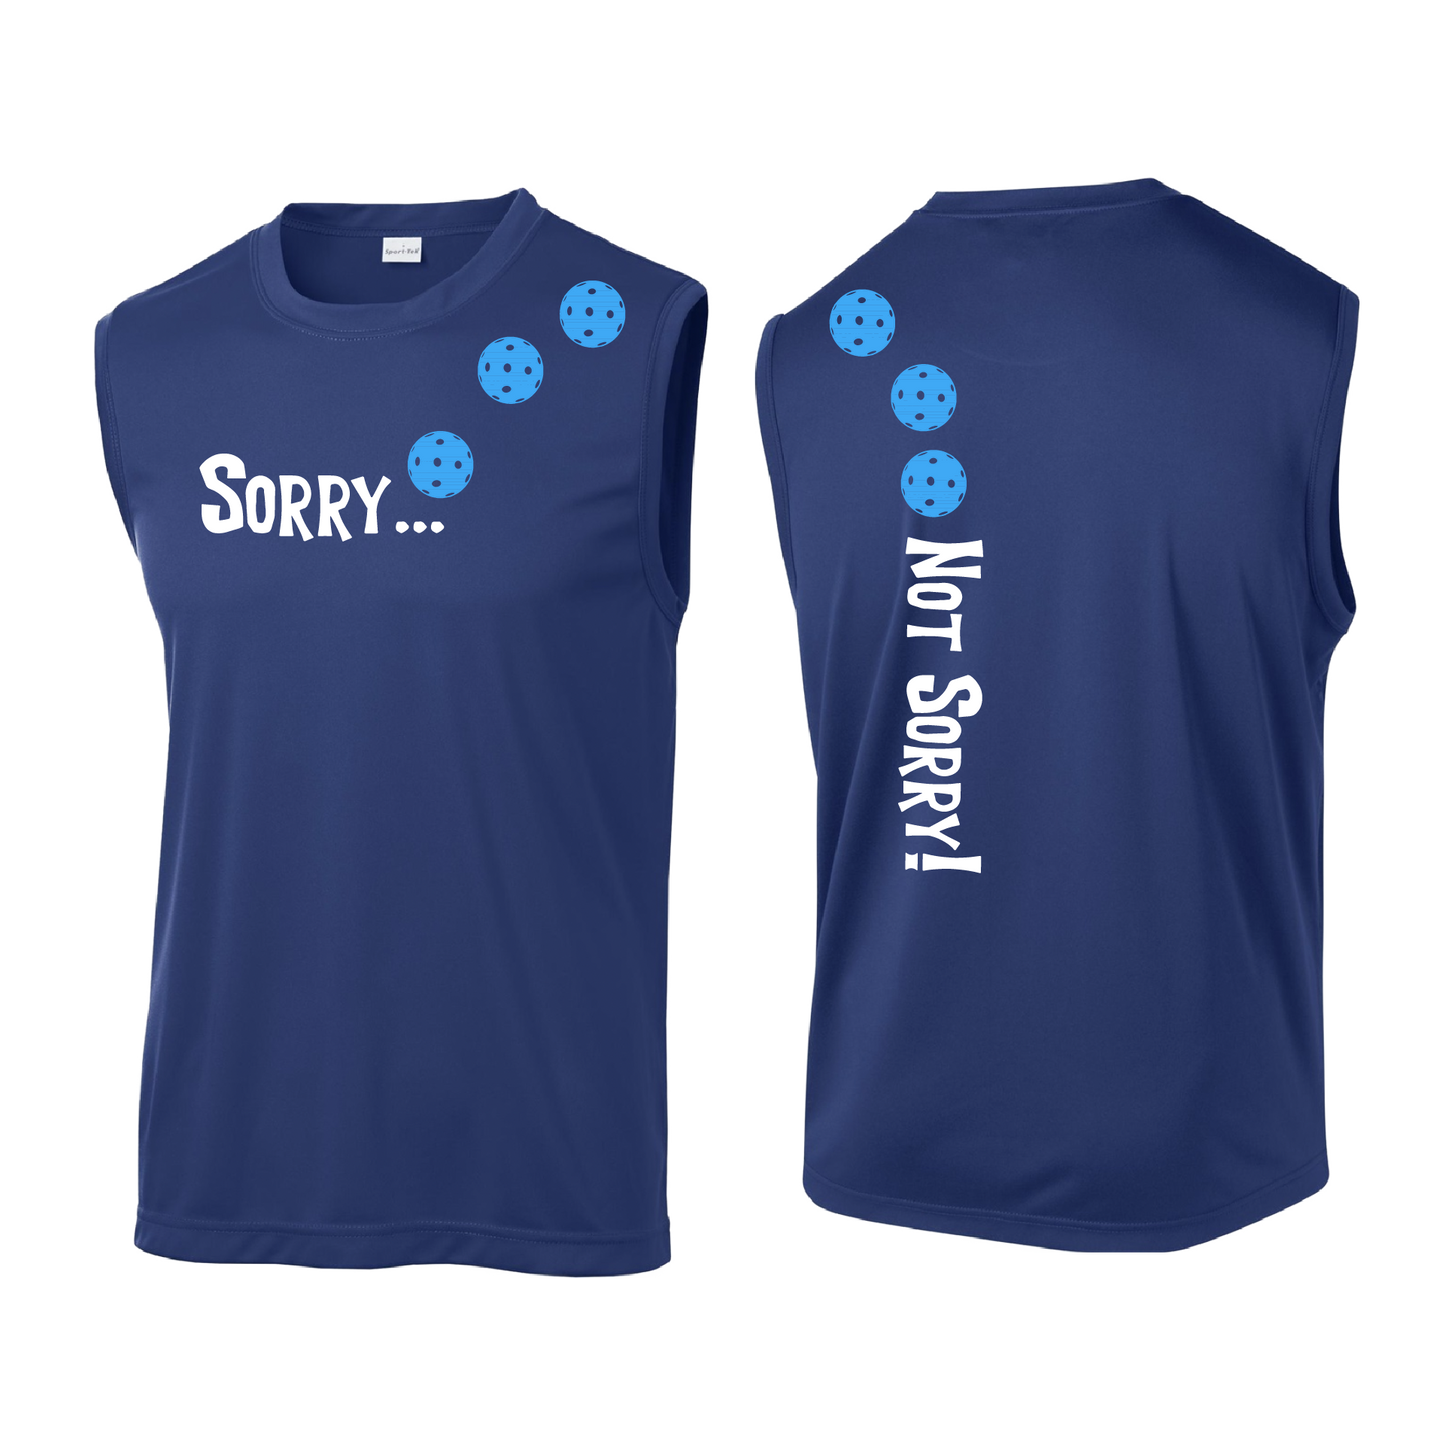 Design: Sorry...Not Sorry! with Customizable Ball Color - Choose: Yellow, White or Cyan.   Men's Styles: Sleeveless  Shirts are lightweight, roomy and highly breathable. These moisture-wicking shirts are designed for athletic performance. They feature PosiCharge technology to lock in color and prevent logos from fading. Removable tag and set-in sleeves for comfort.